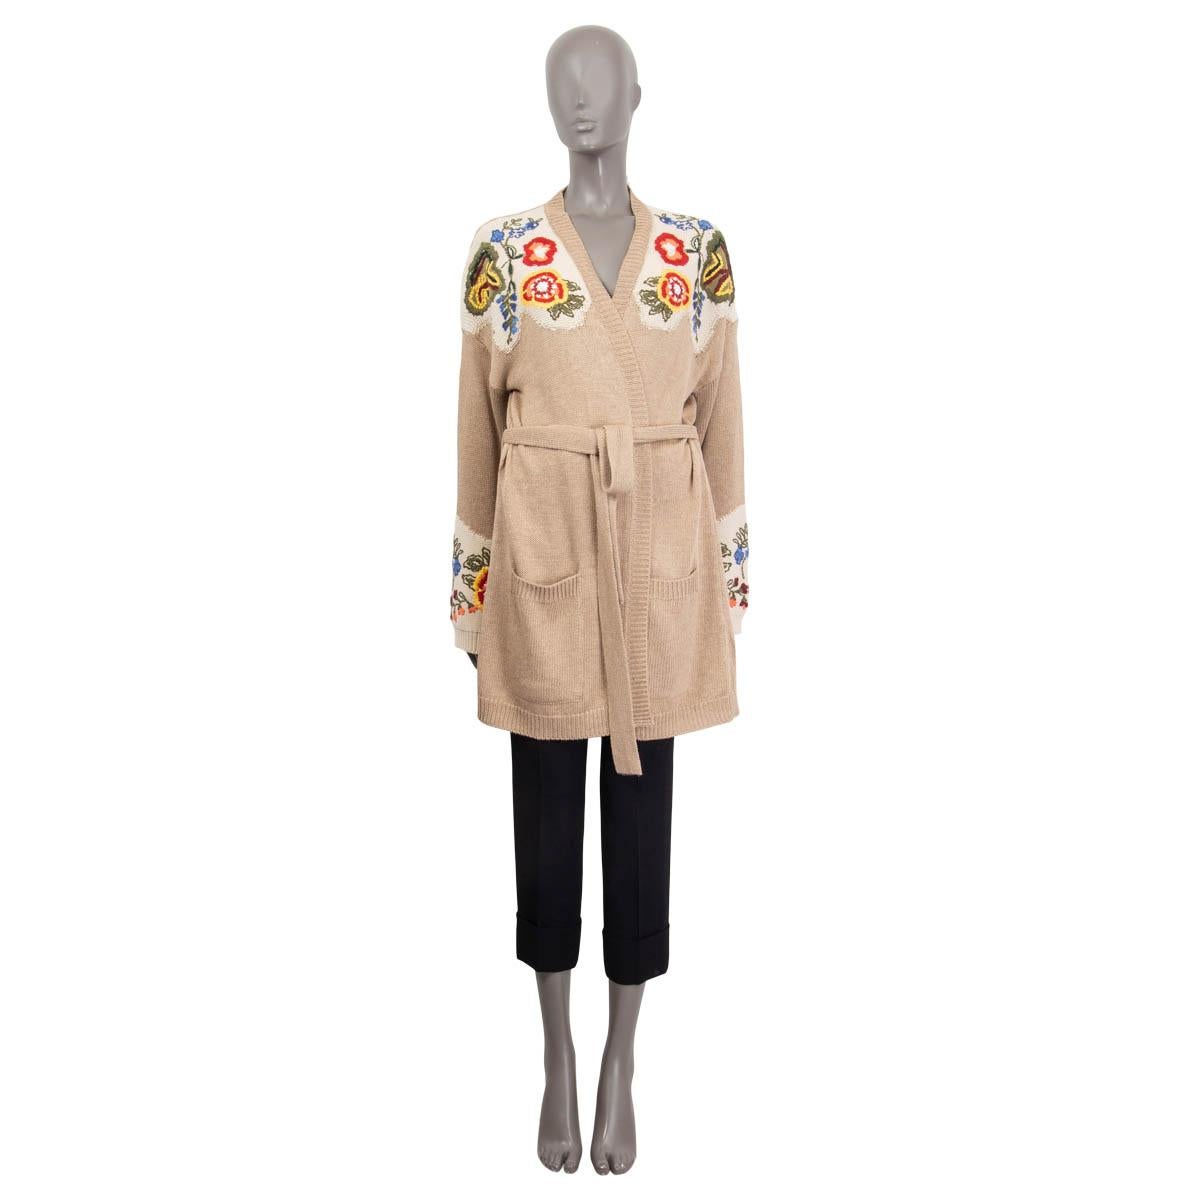 100% authentic Etro belted knit cardigan in beige, yellow, blue, green, red and off-white silk (46%), linen (37%) and cotton (17%). Features a floral print on the shoulders and the cuffs. Has two patch pockets on the front. Unlined. Brand new with